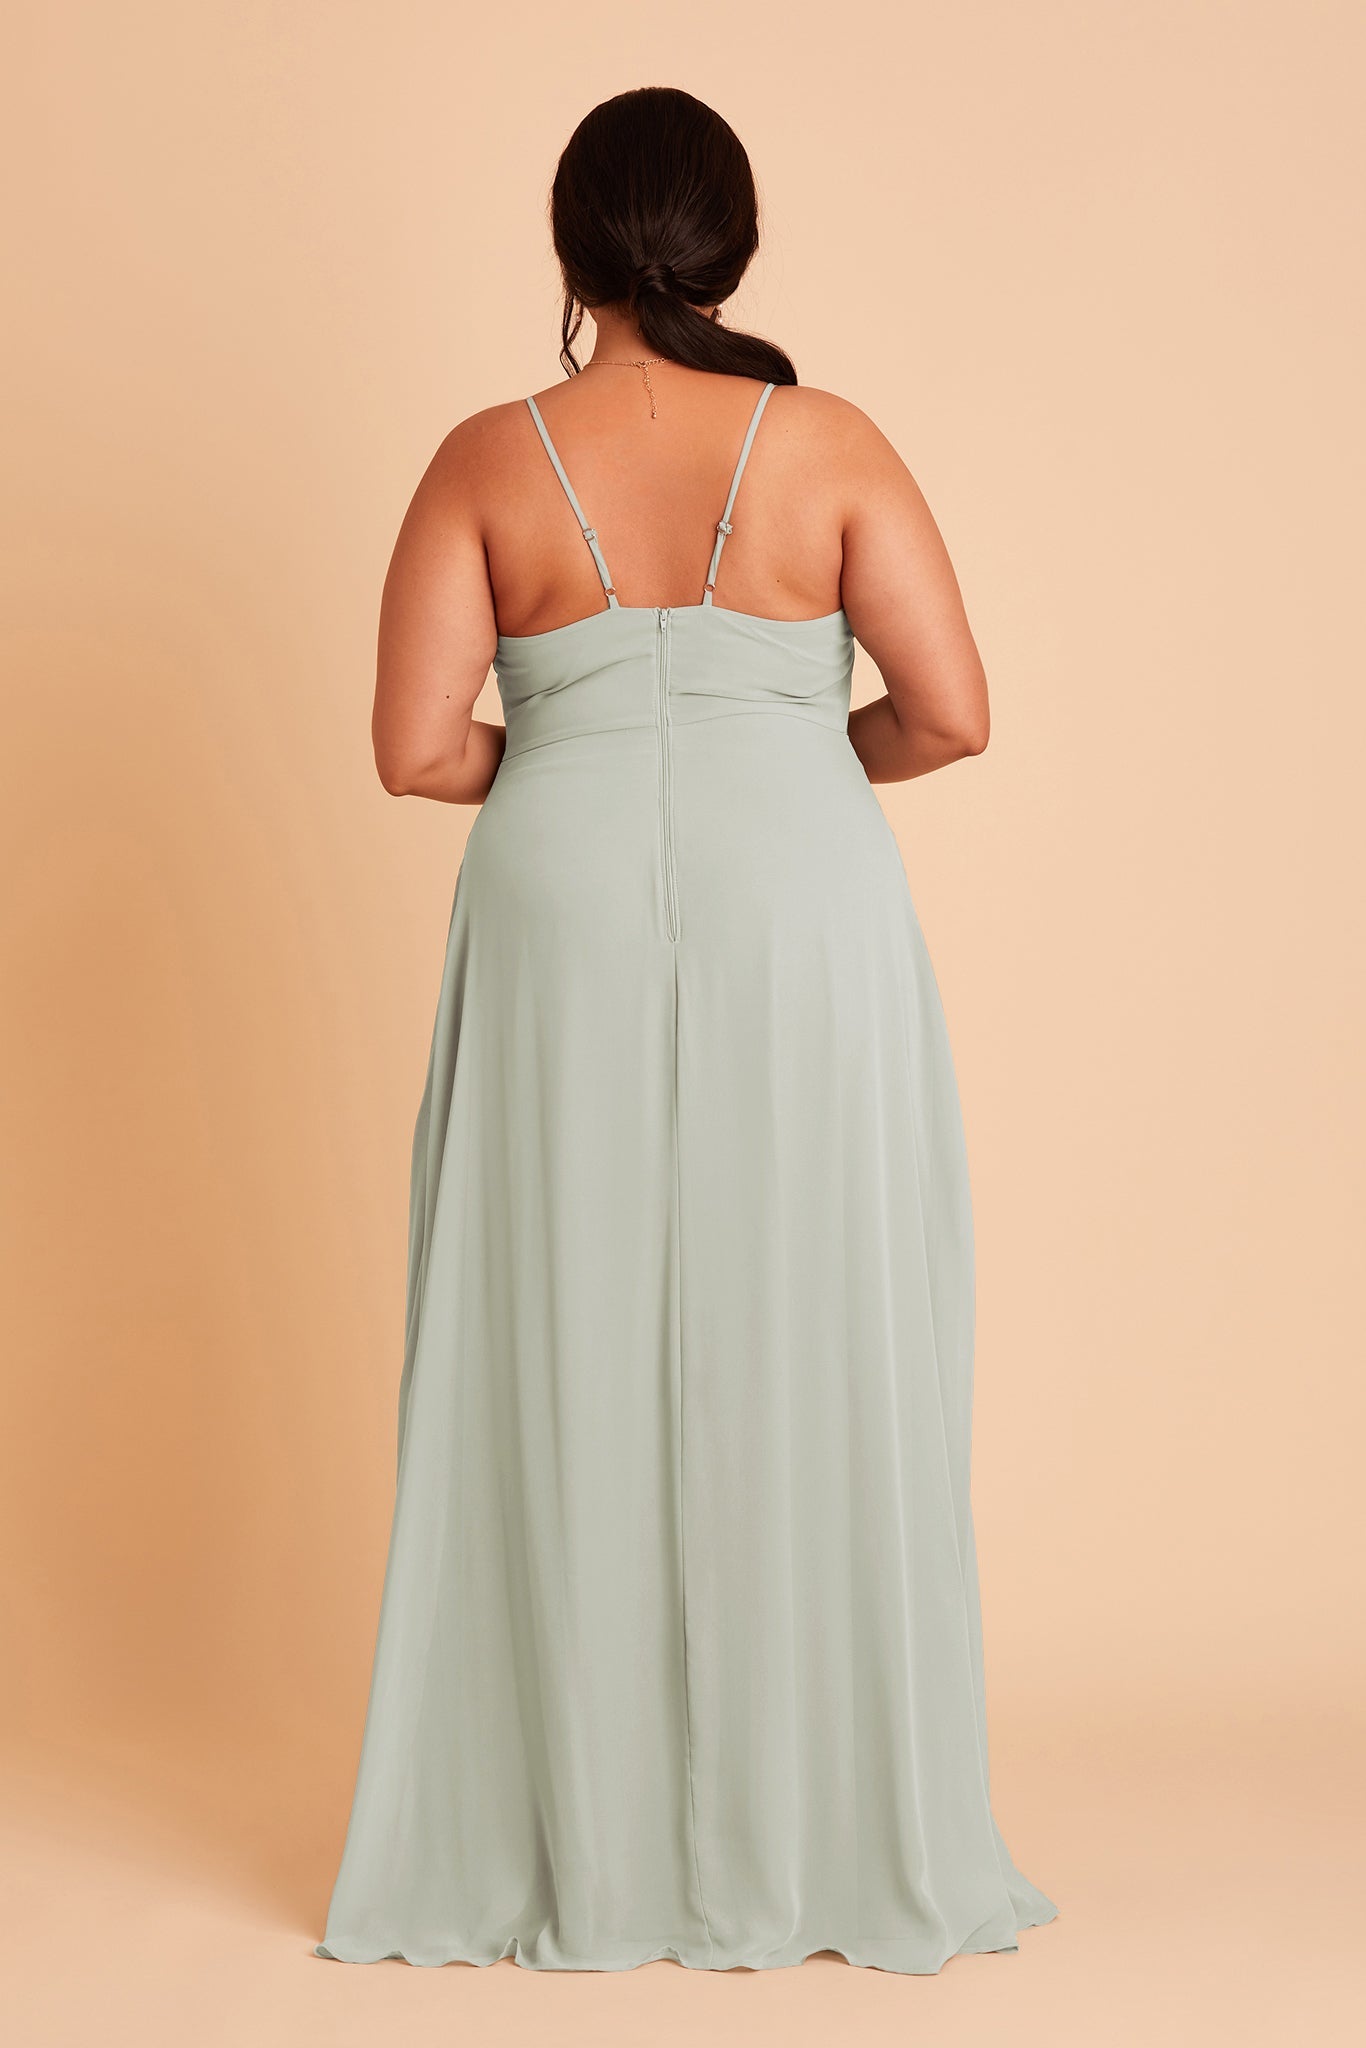 Back view of the Theresa Dress Curve in sage chiffon with the optional slit shows the adjustable, angled shoulder straps attached at the bodice center seam. The hidden zipper is shown in the bodice and skirt center seam. 